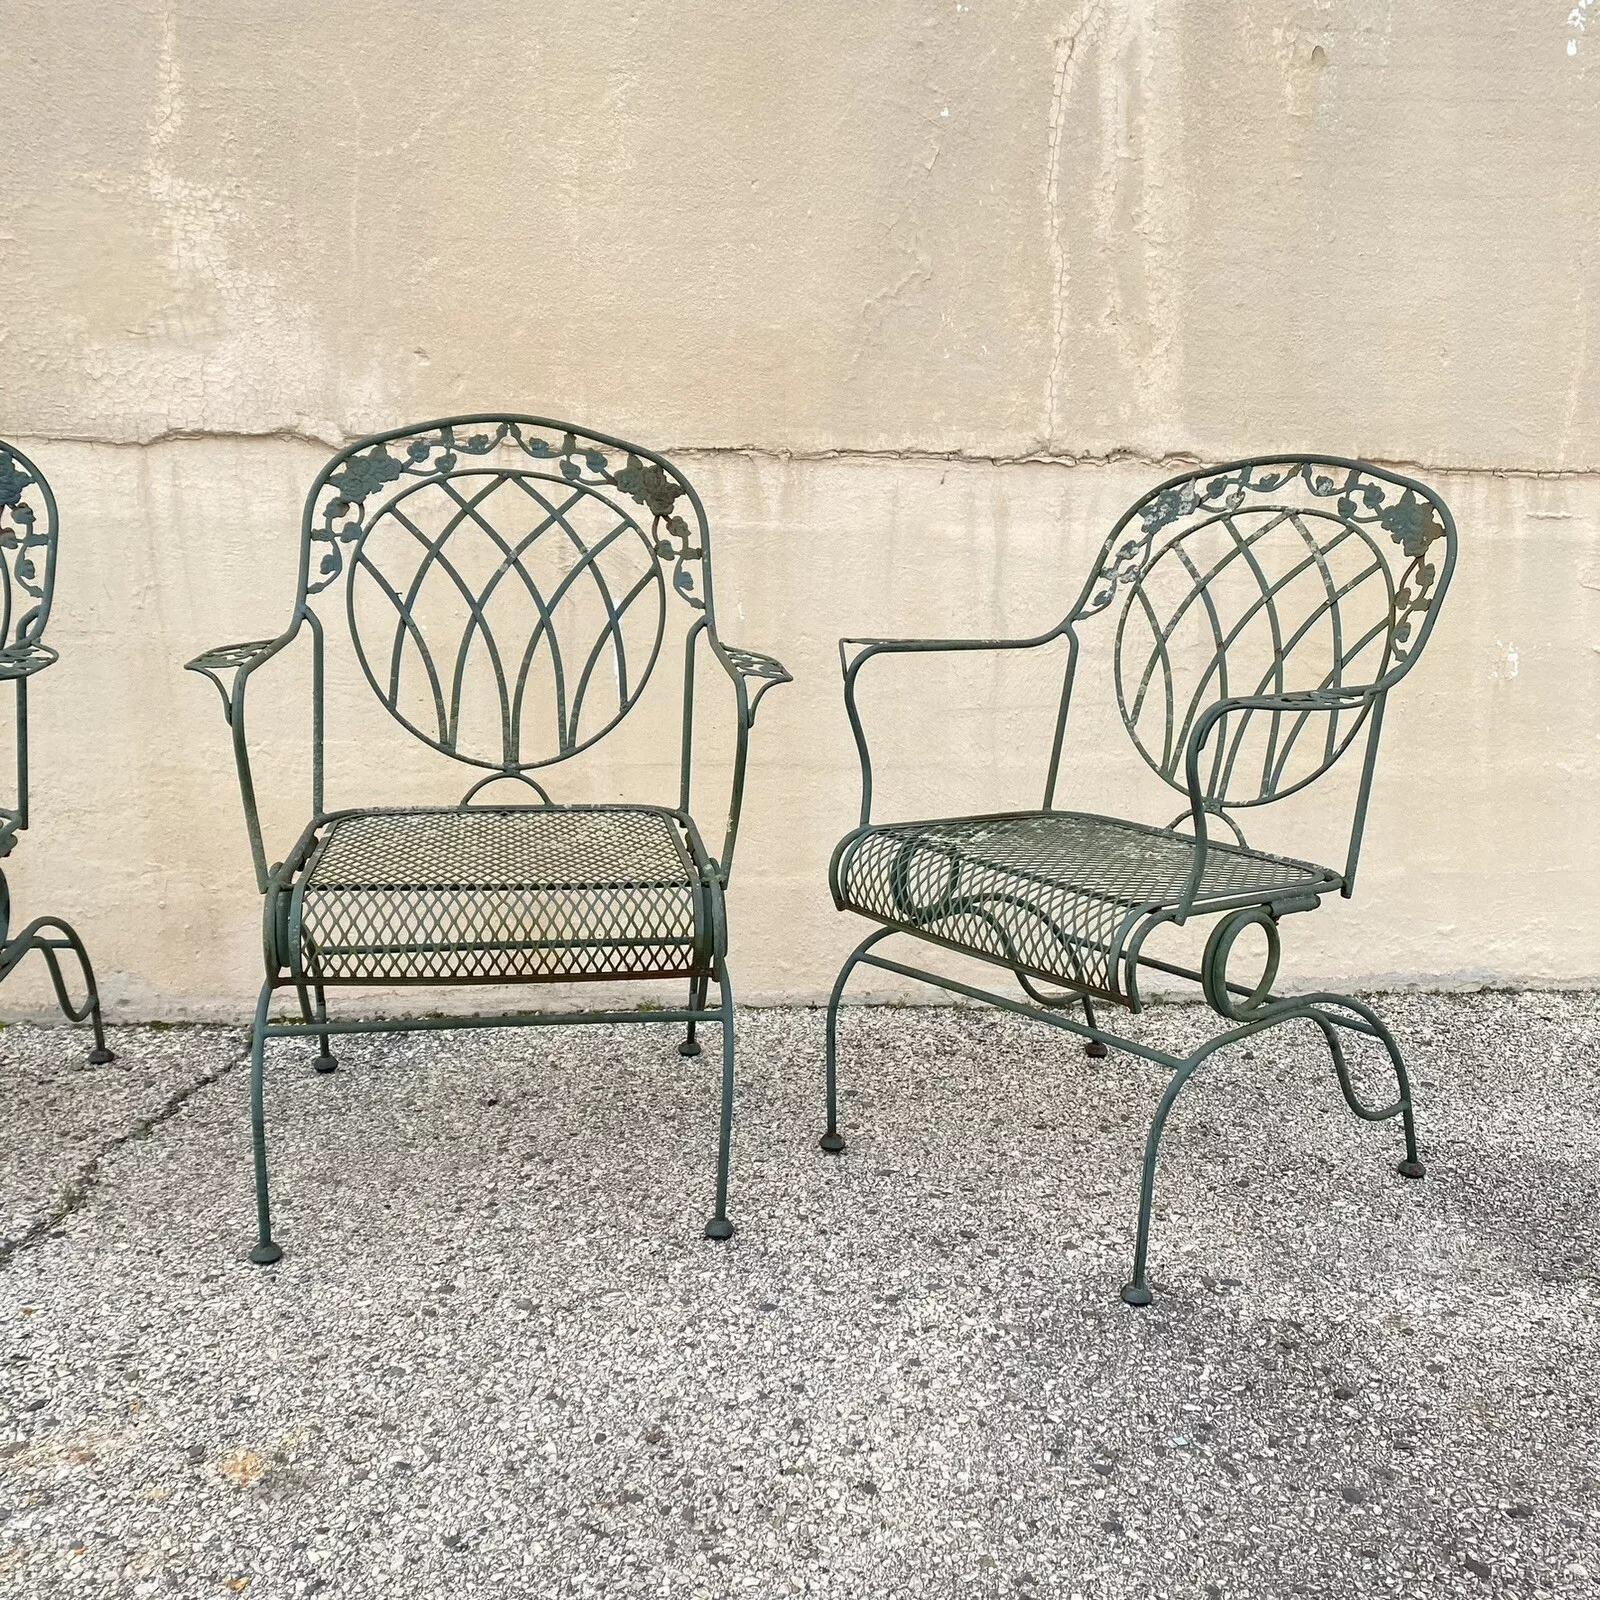 Wrought Iron Green Woodard Rose Style Garden Patio Springer Chairs - Set of 4 For Sale 4